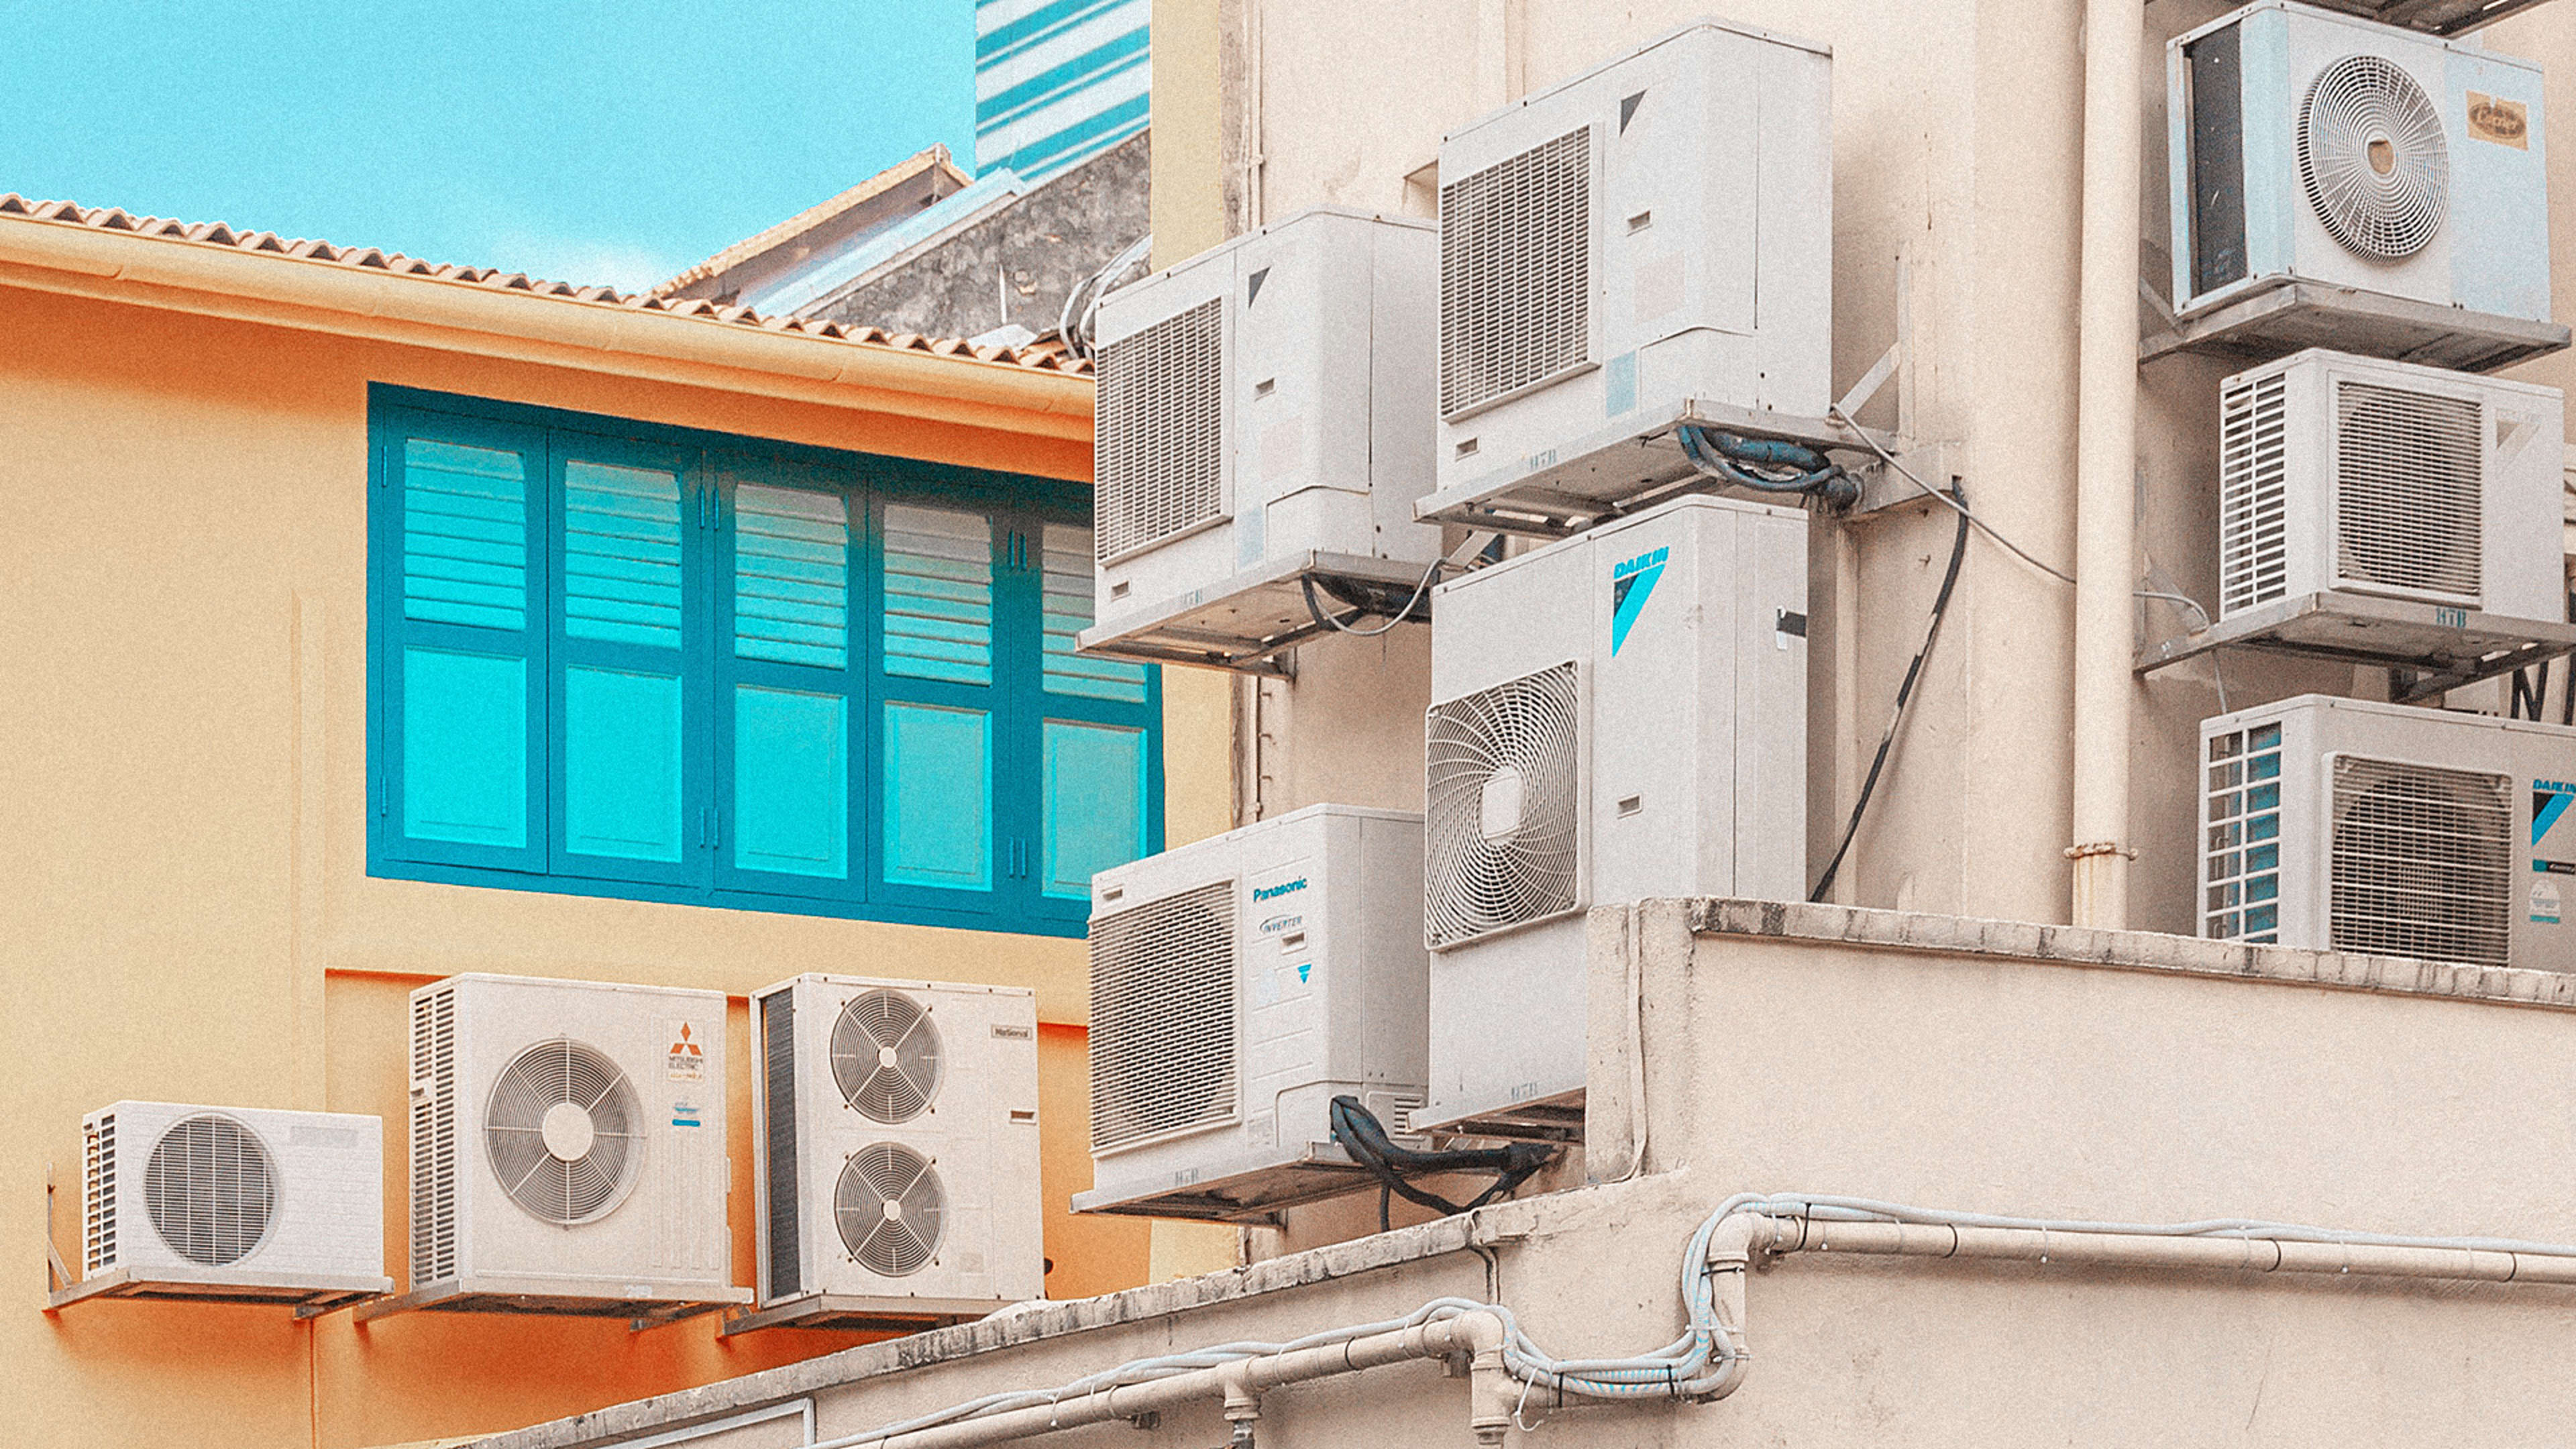 Richard Branson just launched a $3 million prize for a better air conditioner